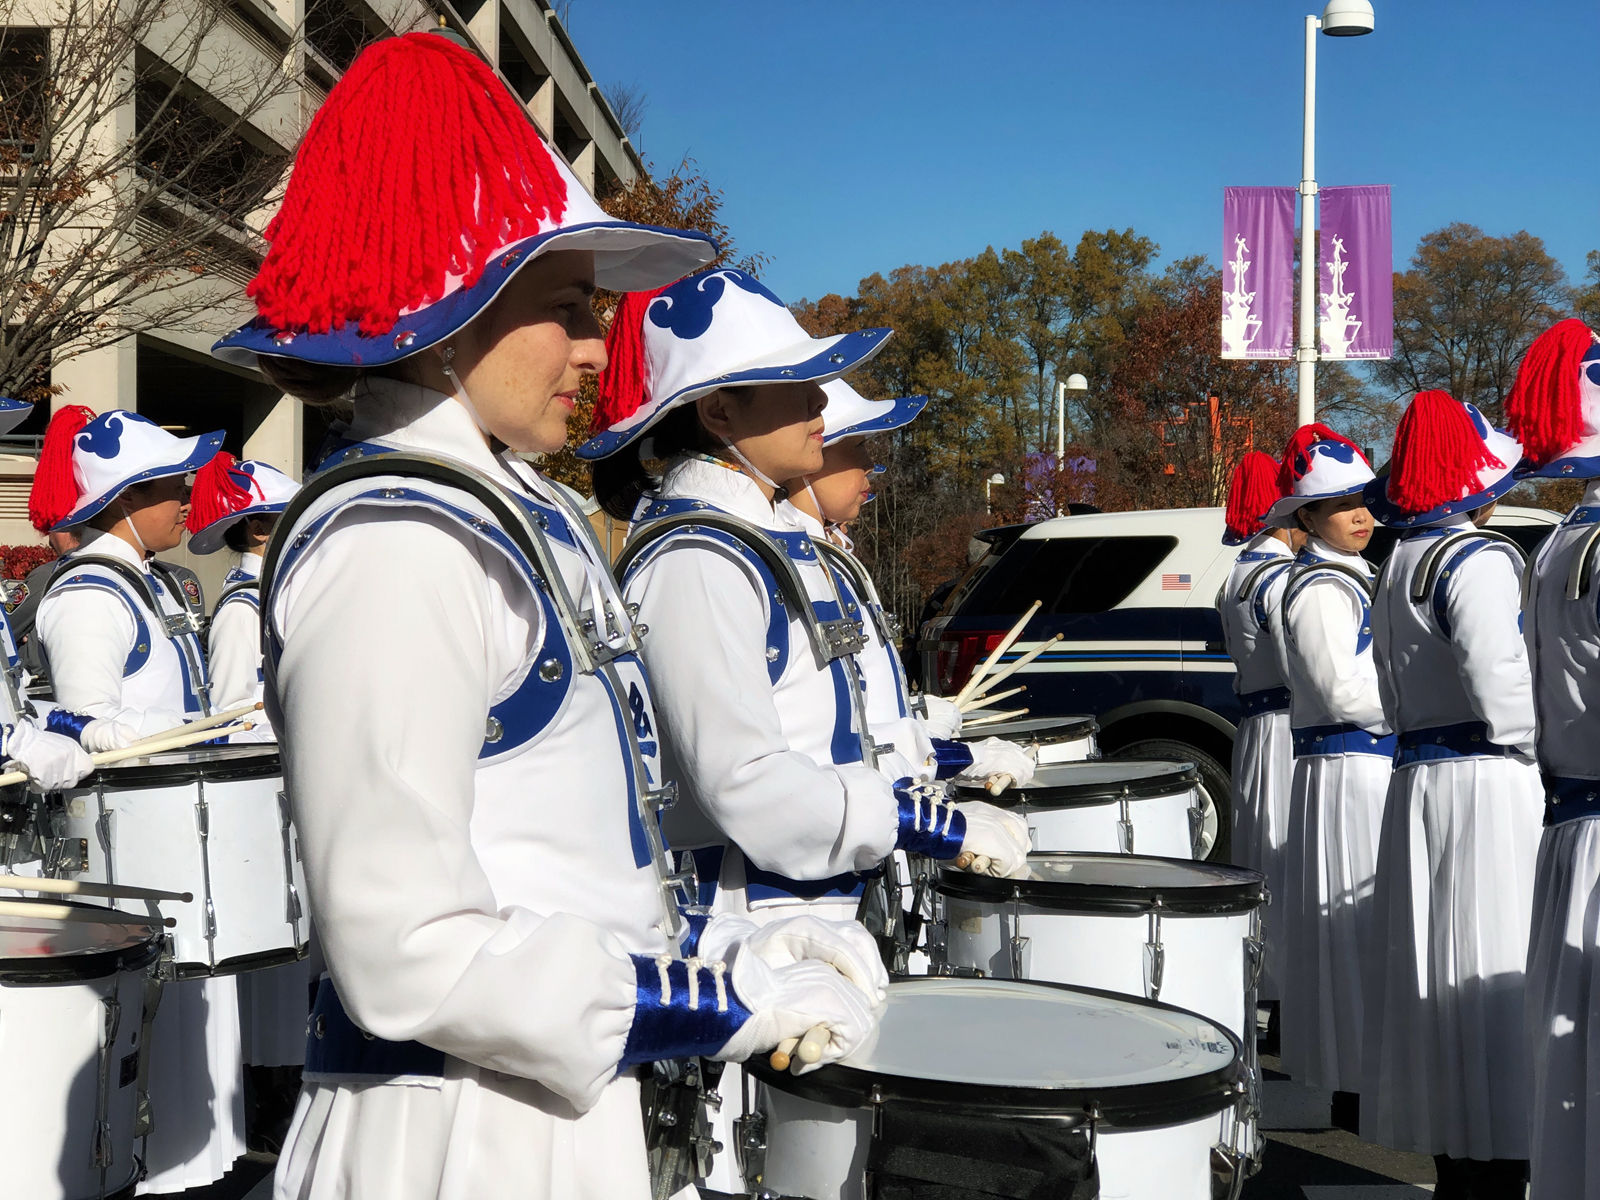 One of the marching bands at the Reston holiday parade gets ready to step off. The annual Reston Holiday Parade took place on Black Friday this year, in the center of the shopping district. (WTOP/Kate Ryan)